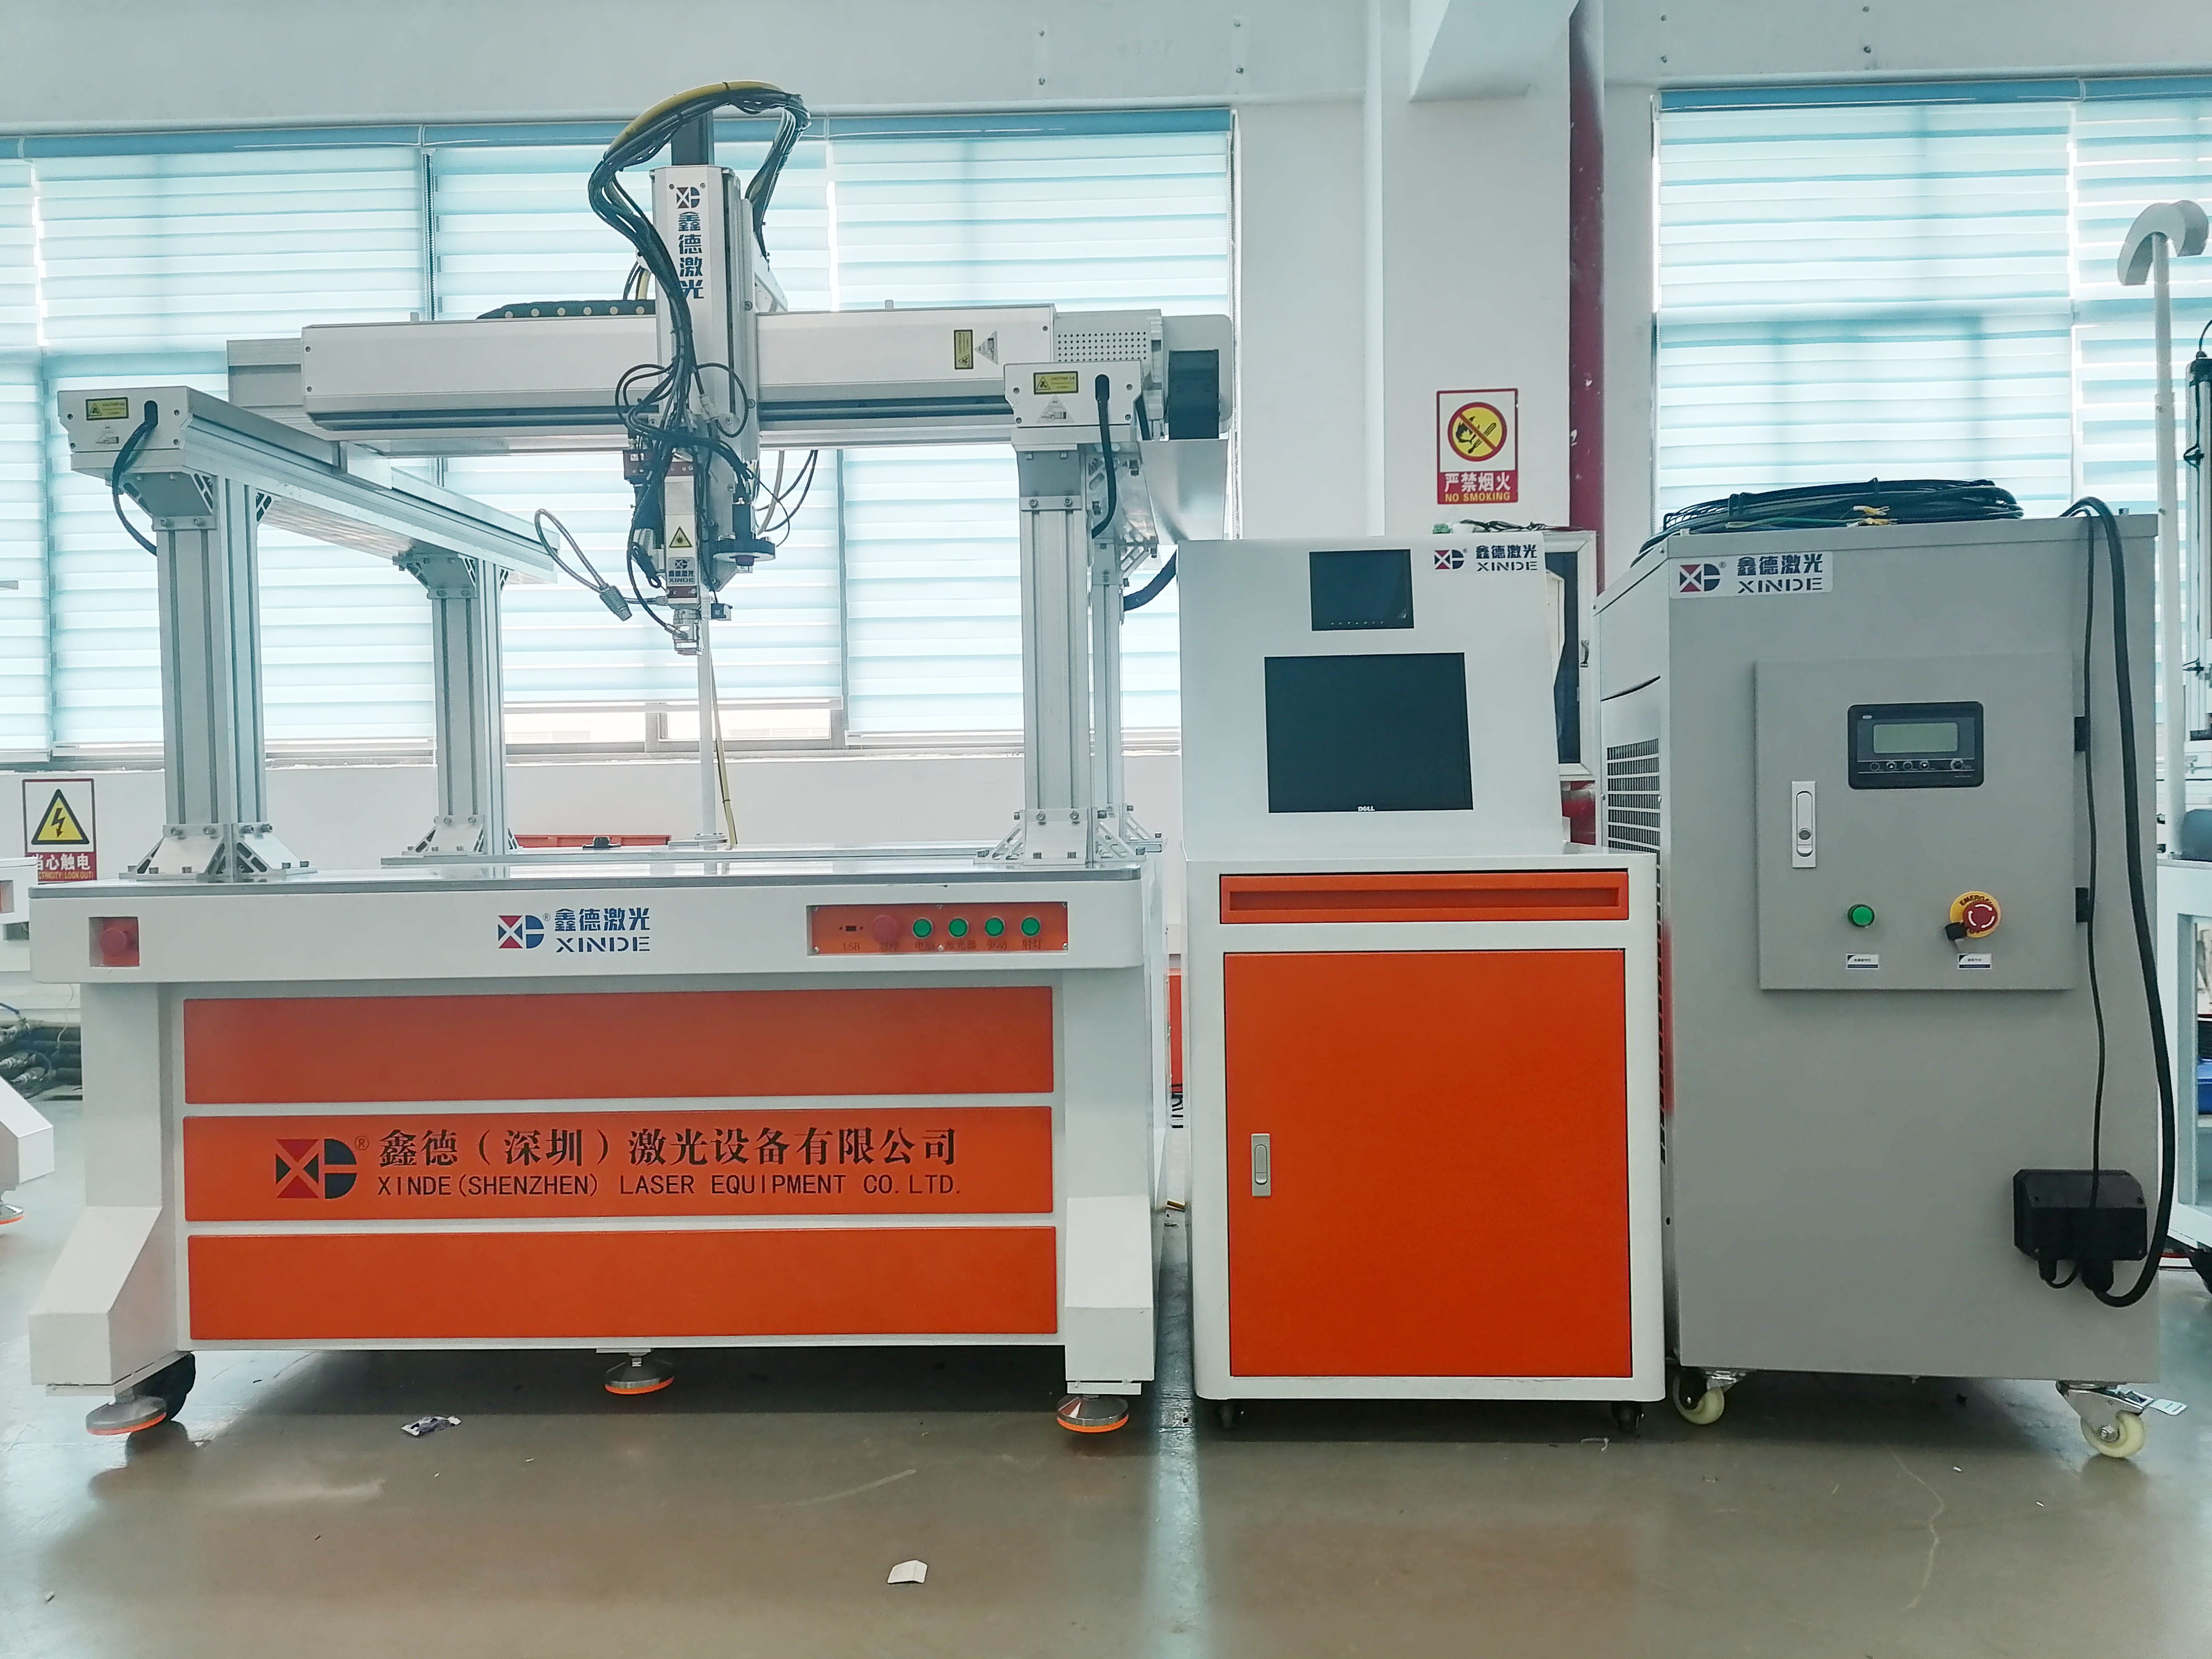 How much does a lithium battery laser welding machine cost?